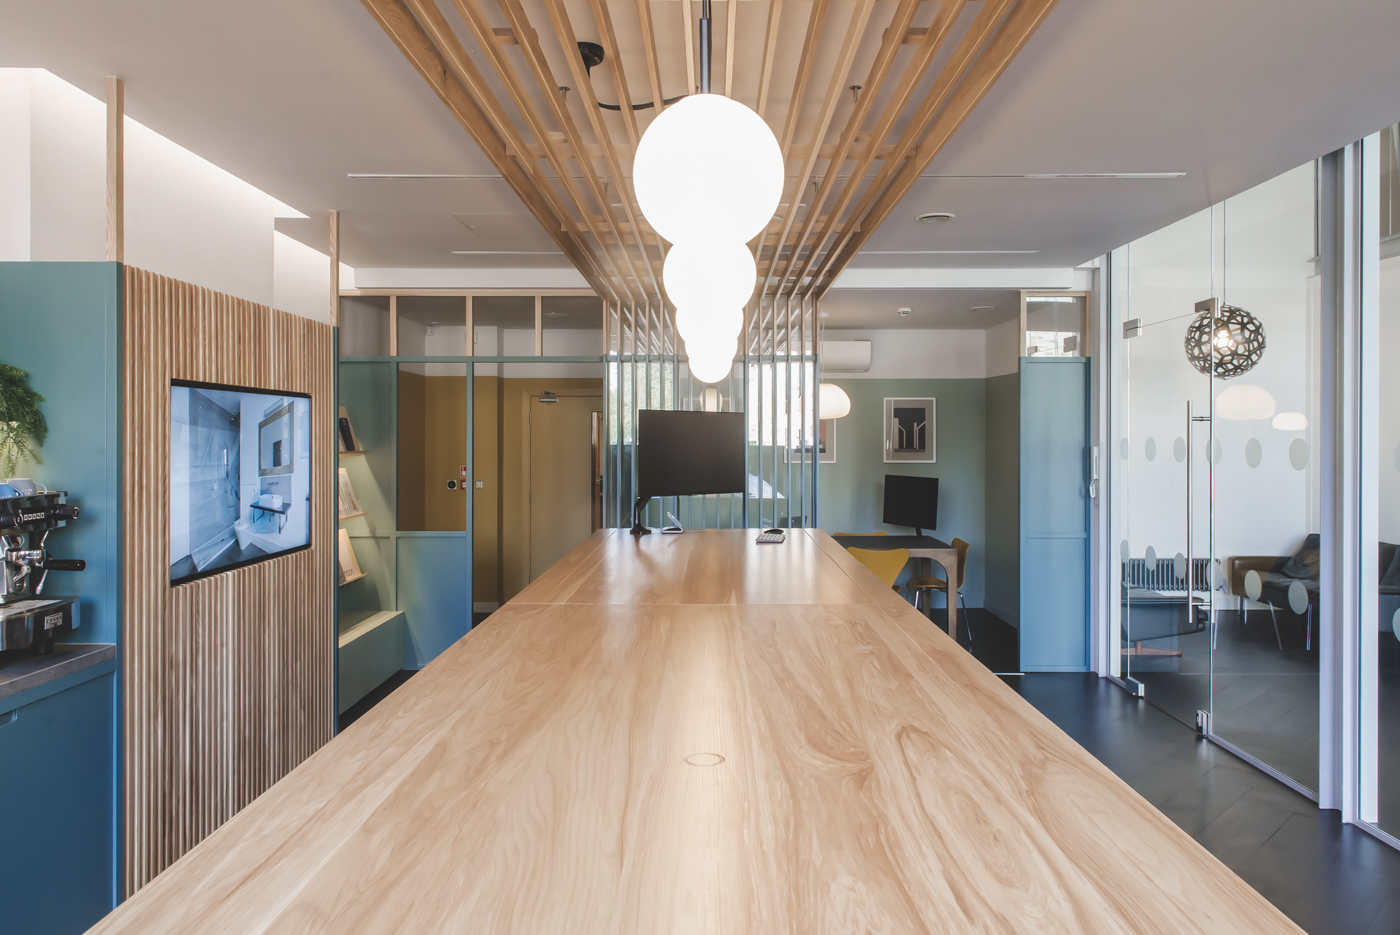 Timber meeting room table